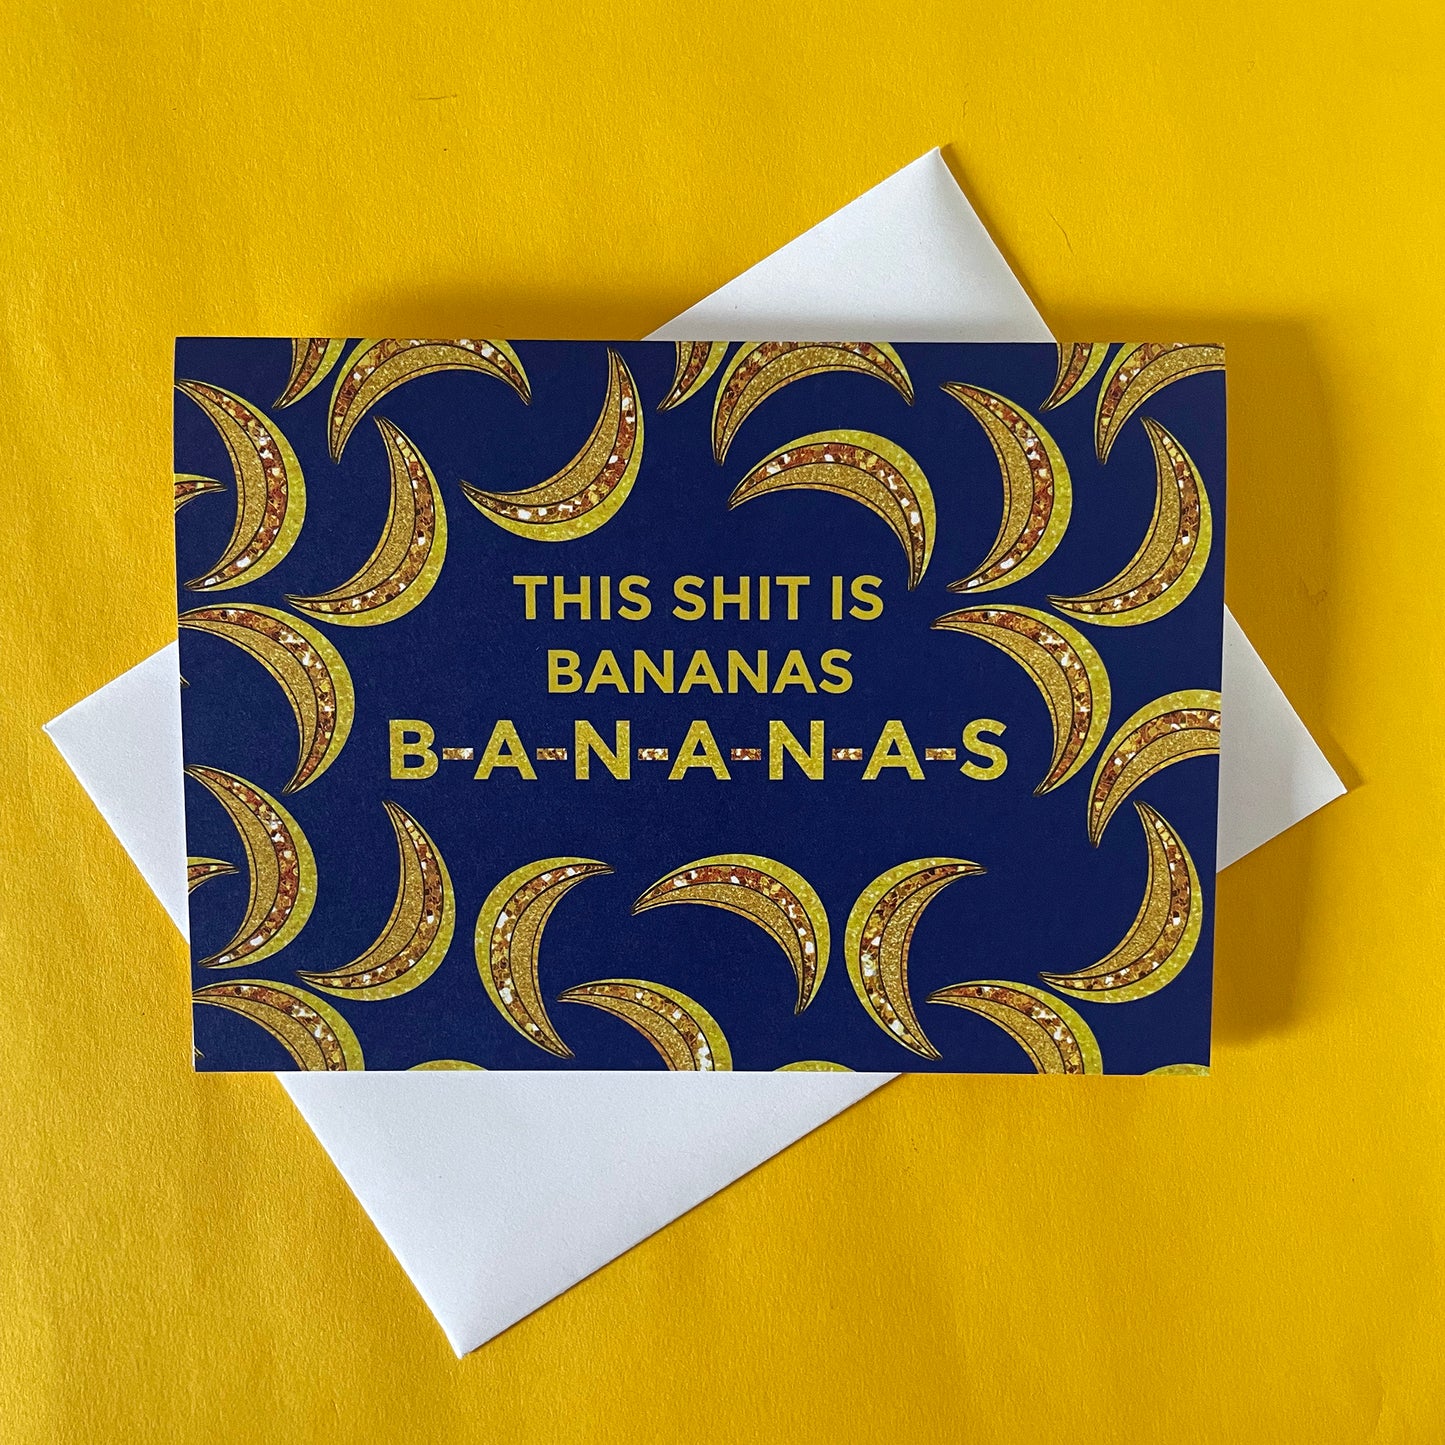 Image of a blue card on a bright yellow background. The card features bejewelled illustrations of bananas and the message 'This Shit is Bananas B-A-N-A-N-A-S.